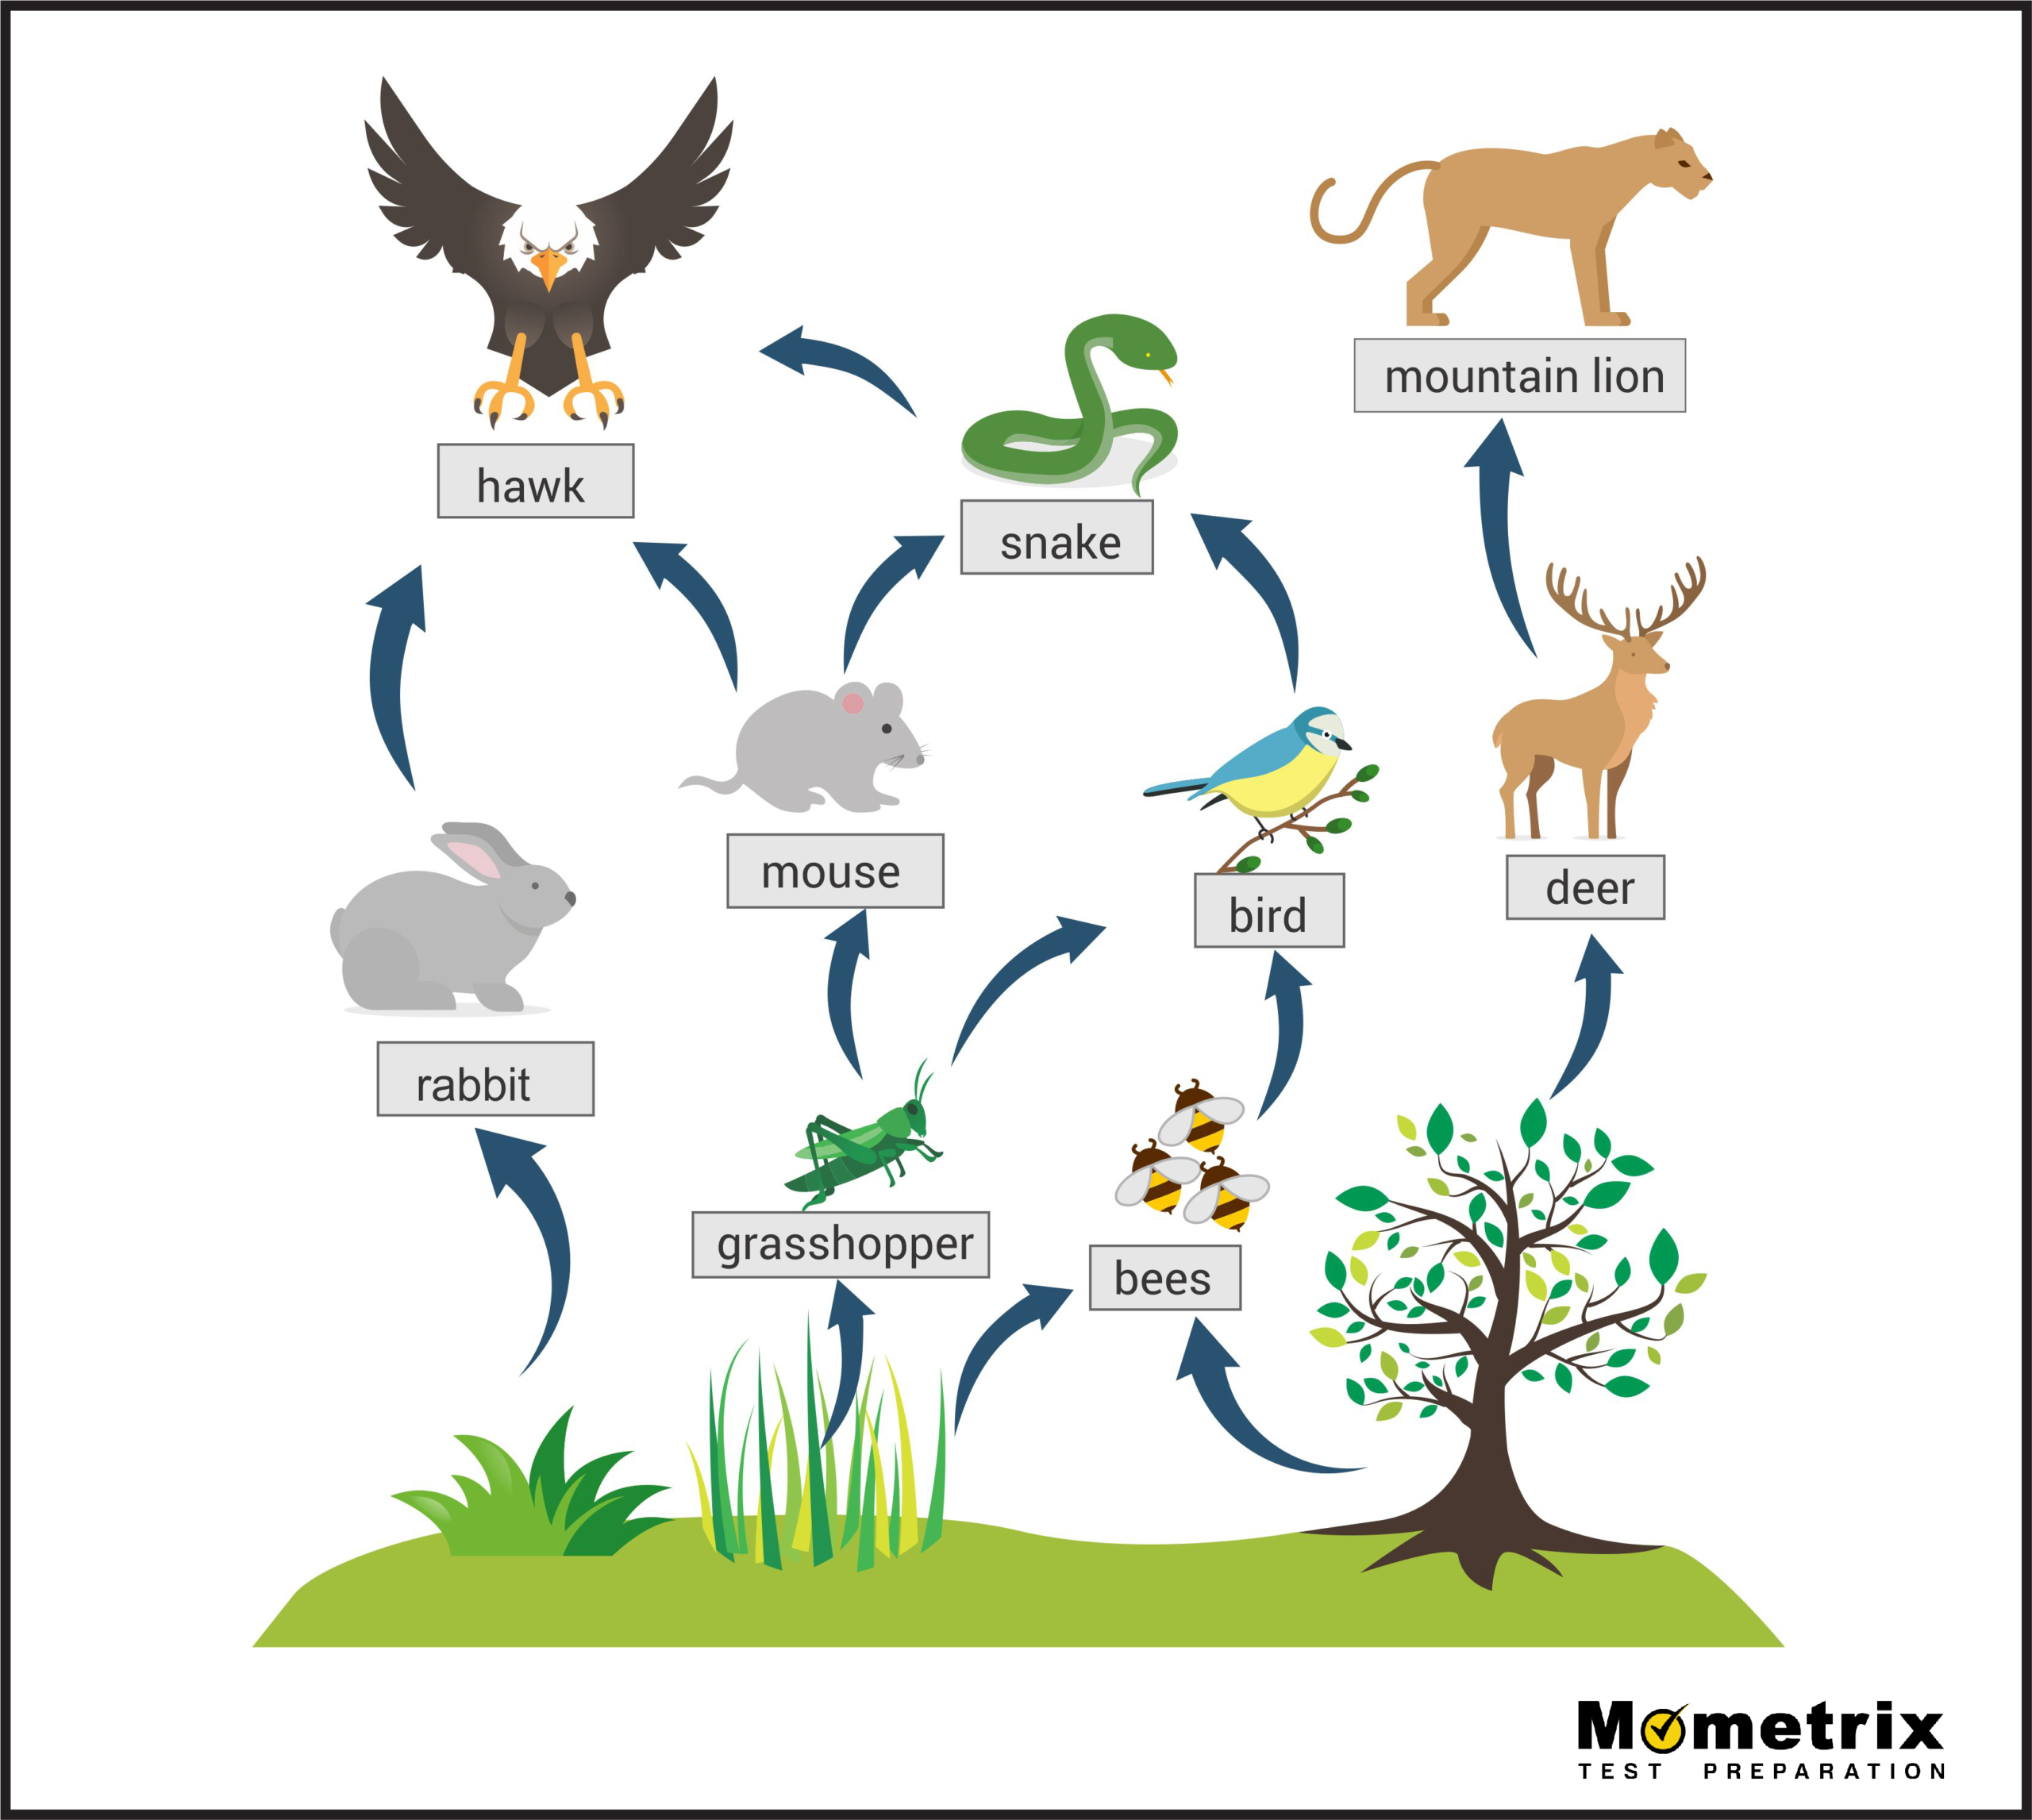 <p>What are the tertiary consumers in this food web?</p>